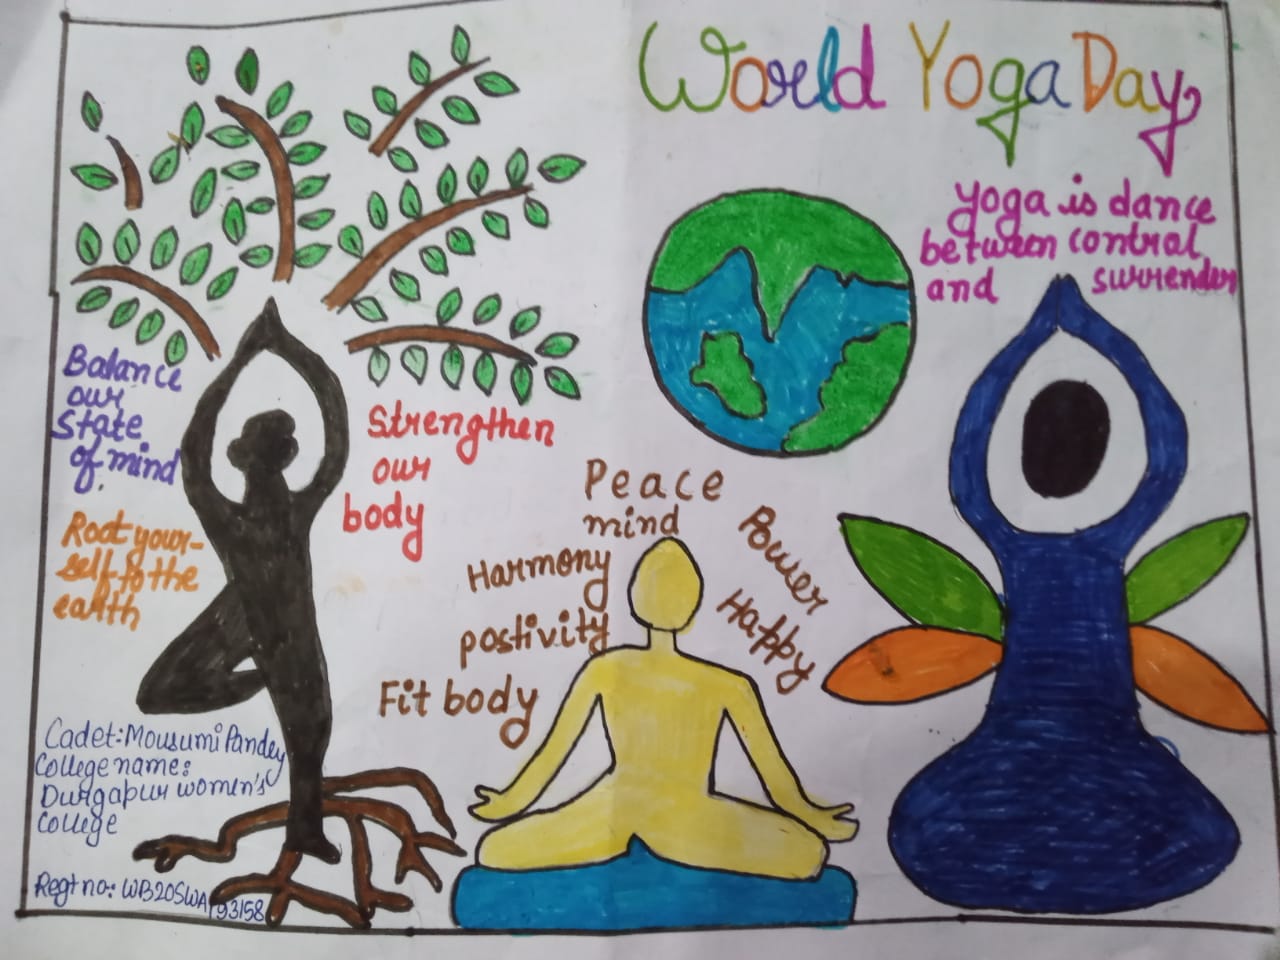 international yoga day drawing. yoga day poster making. | By Easy Drawing  SAFacebook